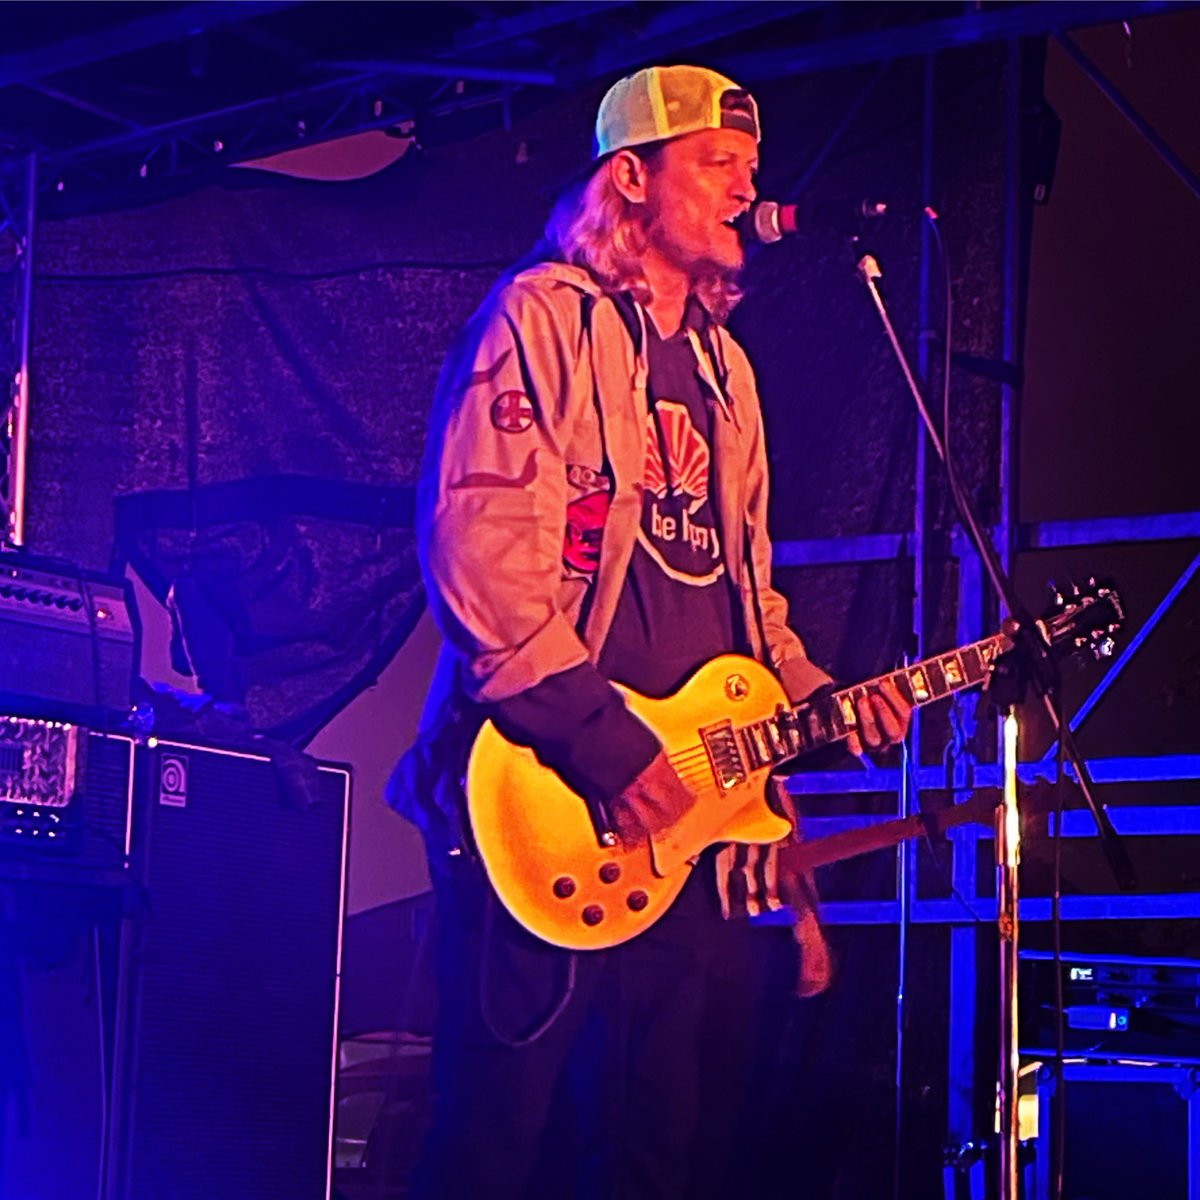 Strong show in rural Jersey last weekend. Wes Scantlin, Puddle of Mudd. My photo.
Frenchtown, New Jersey.
#puddleofmudd #jerrycantrell #grunge #wesscantlin #postgrunge #rock #topguitar #frenchtownnj